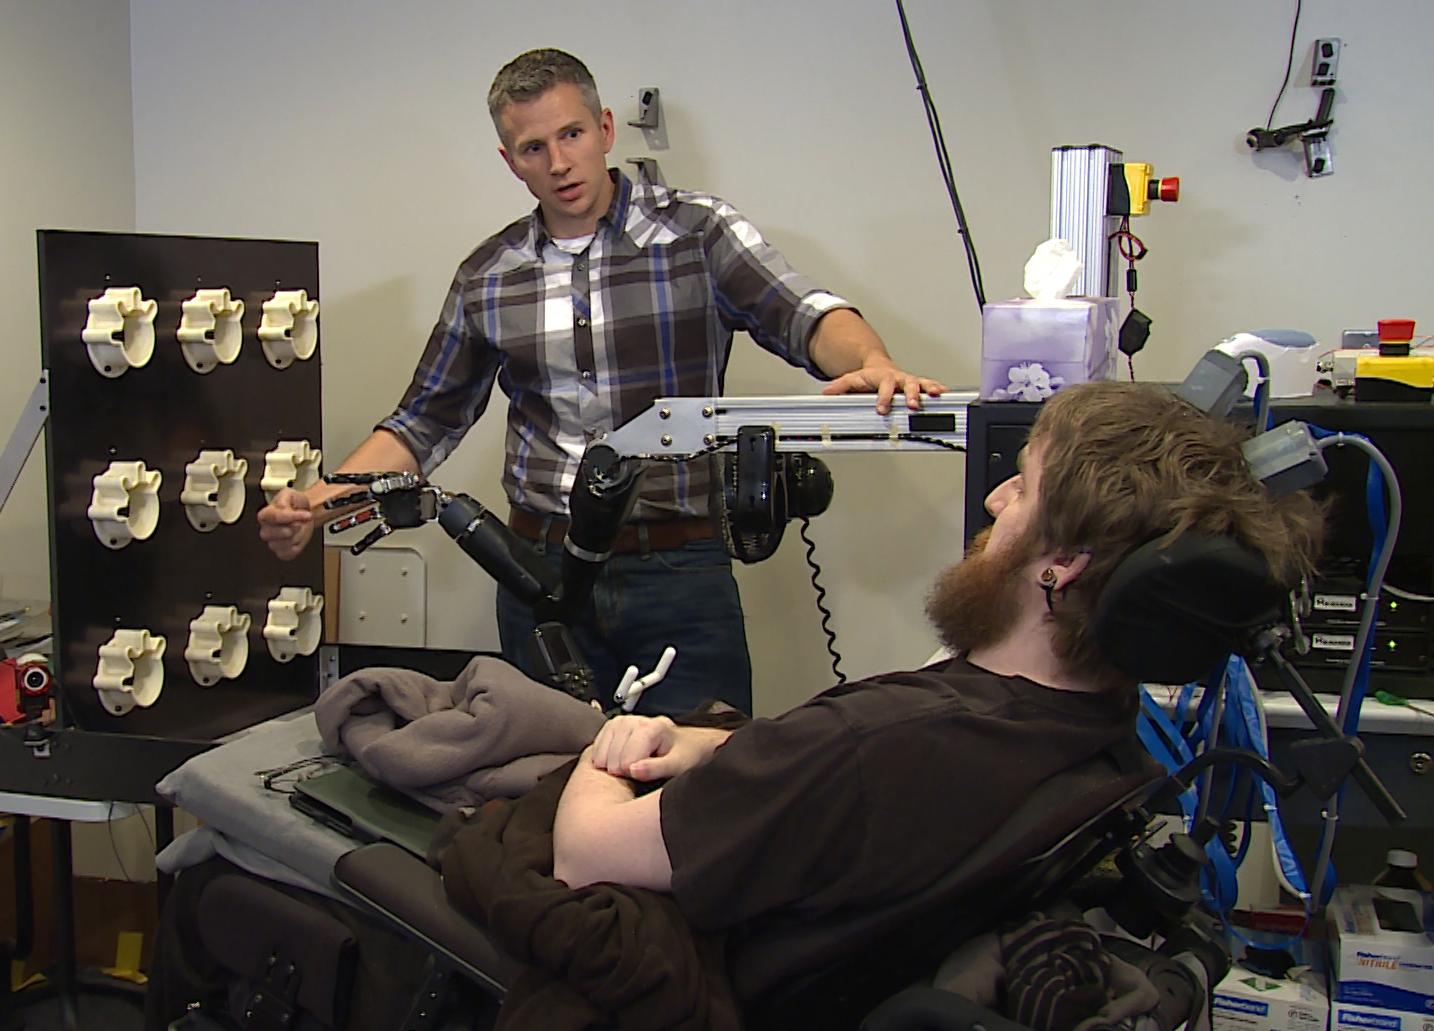 Rob Gaunt from the University of Pittsburgh prepares Nathan Copeland, who was paralyzed in 2004, for a brain computer interface sensory test using a robotic arm. (UPMC / Pitt Health Sciences Media Relations)